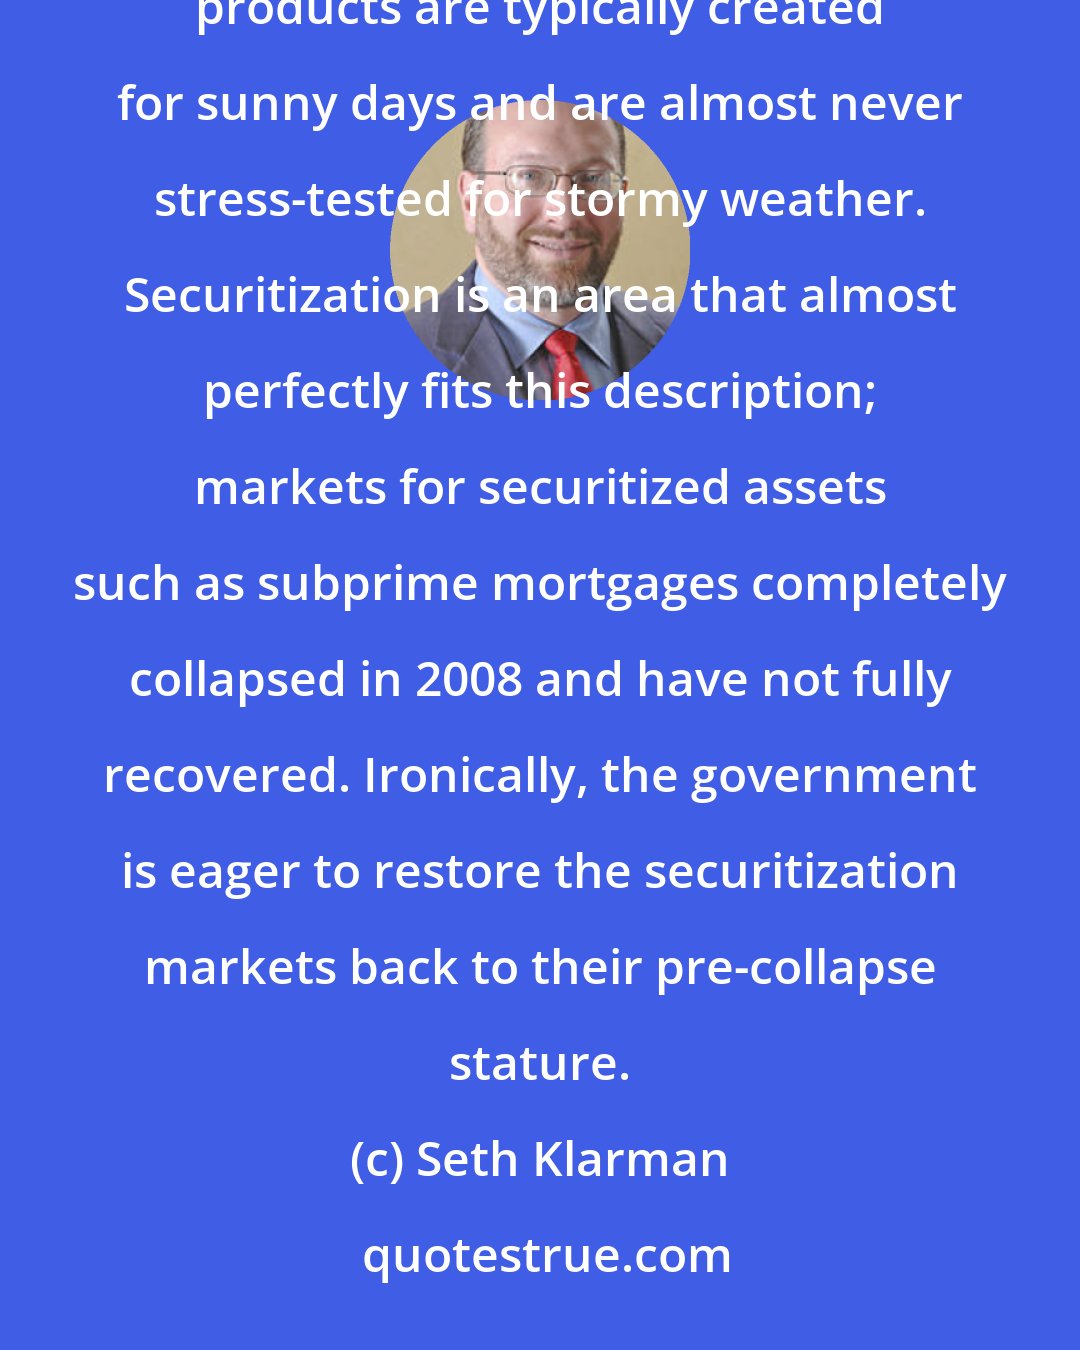 Seth Klarman: Financial innovation can be highly dangerous, though almost no one will tell you this. New financial products are typically created for sunny days and are almost never stress-tested for stormy weather. Securitization is an area that almost perfectly fits this description; markets for securitized assets such as subprime mortgages completely collapsed in 2008 and have not fully recovered. Ironically, the government is eager to restore the securitization markets back to their pre-collapse stature.